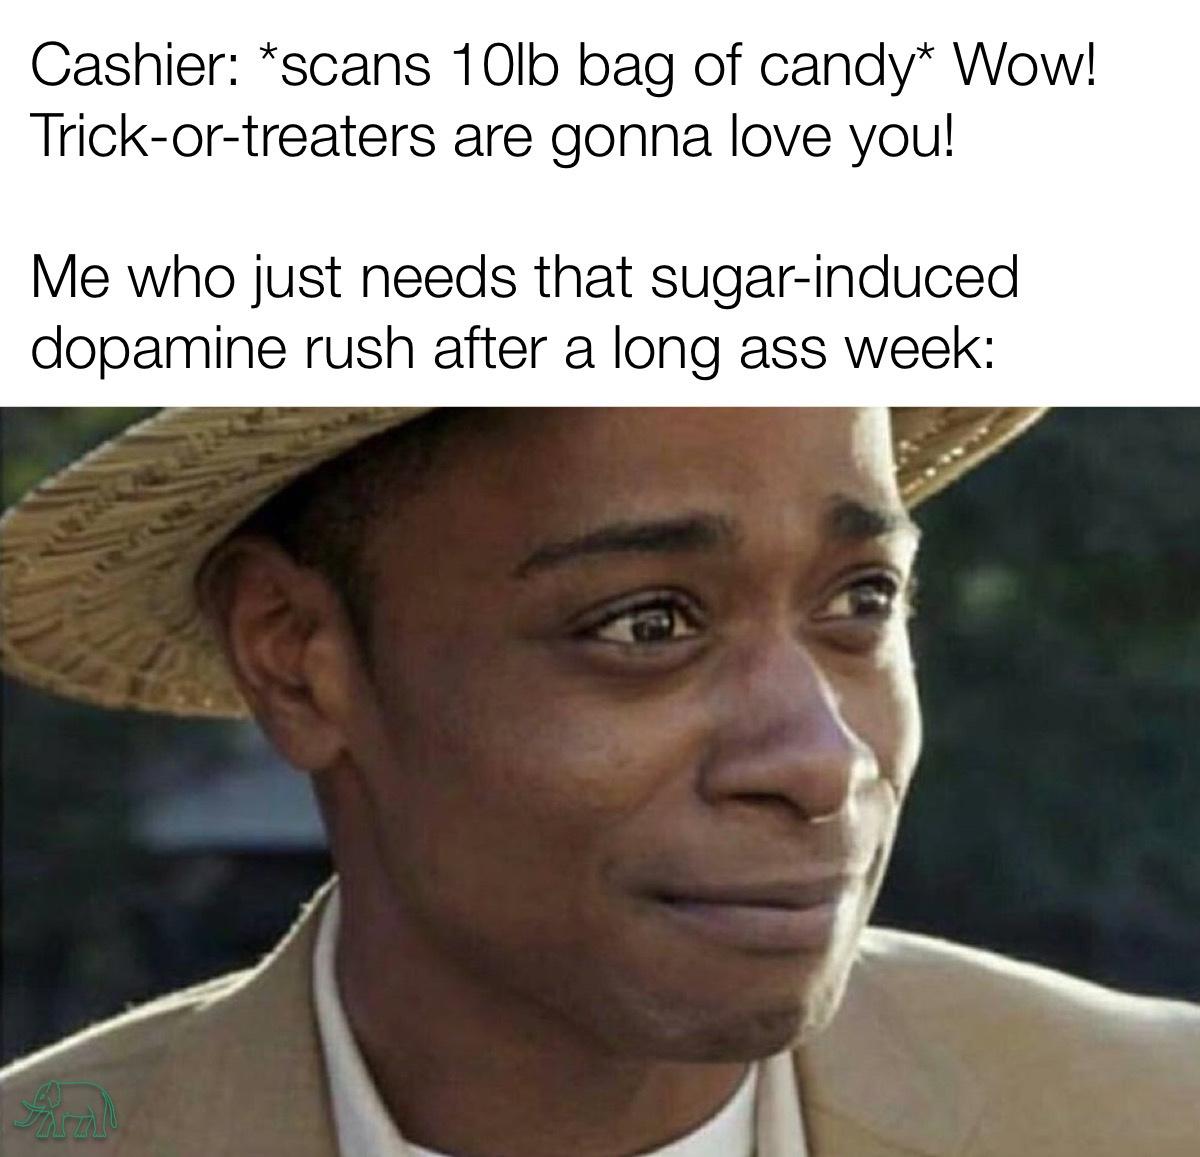 they say memes - Cashier scans 10lb bag of candy Wow! Trickortreaters are gonna love you! Me who just needs that sugarinduced dopamine rush after a long ass week